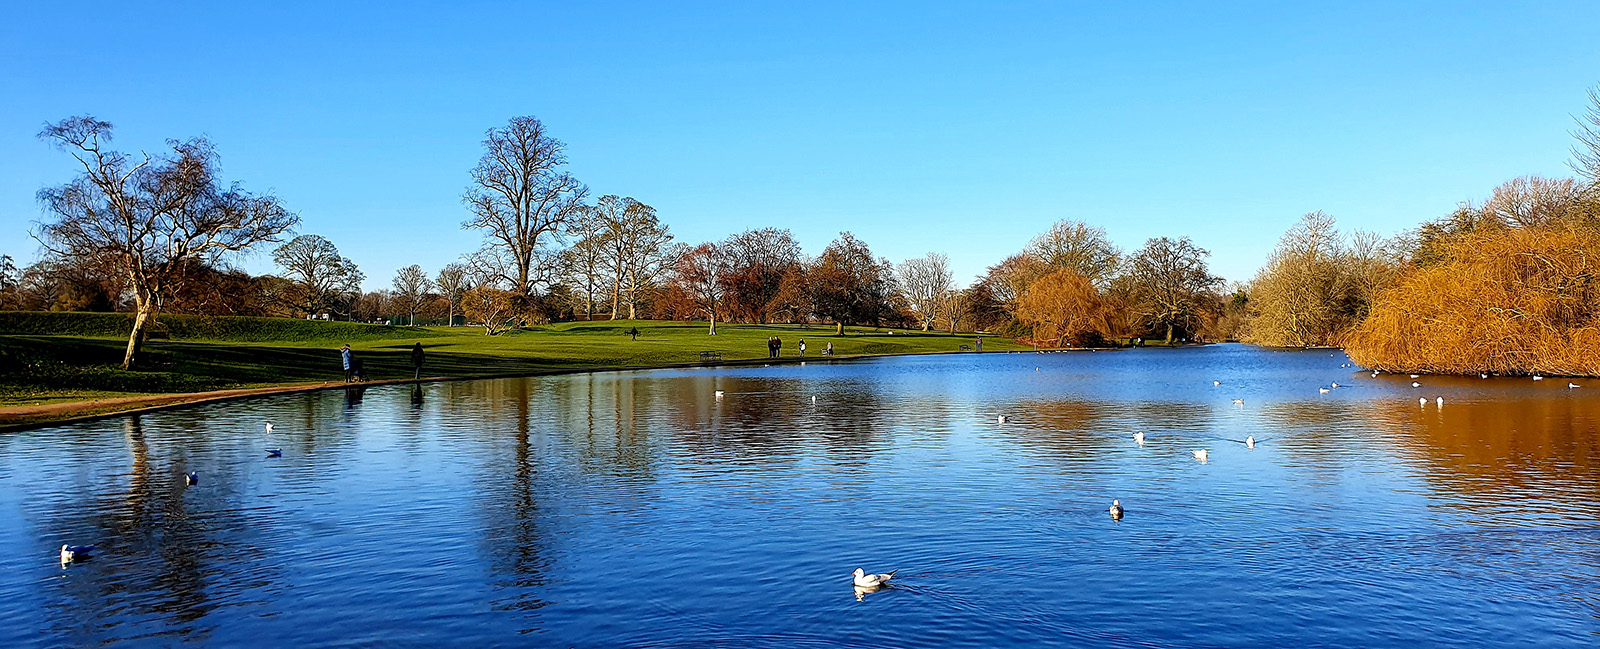 St Albans lake during winter